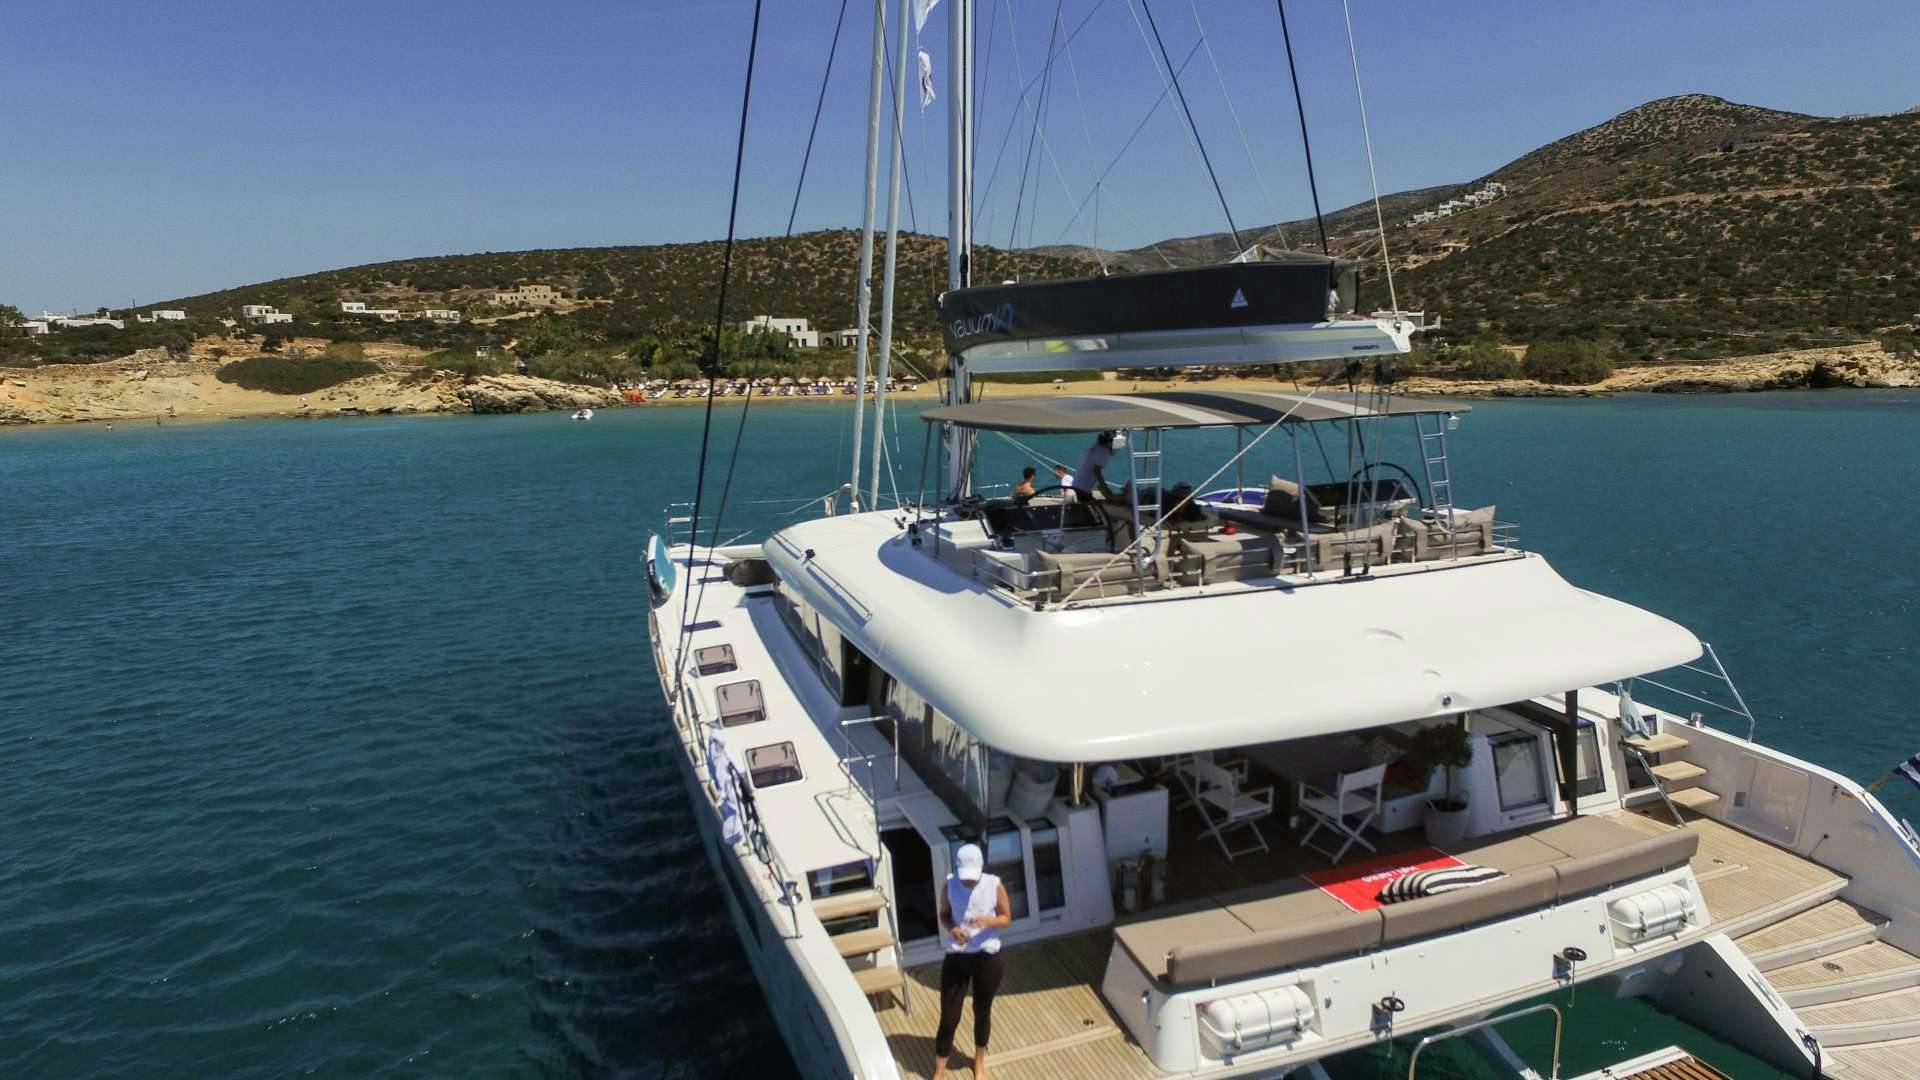 valium62 - Alimos Yacht Charter & Boat hire in Greece 1